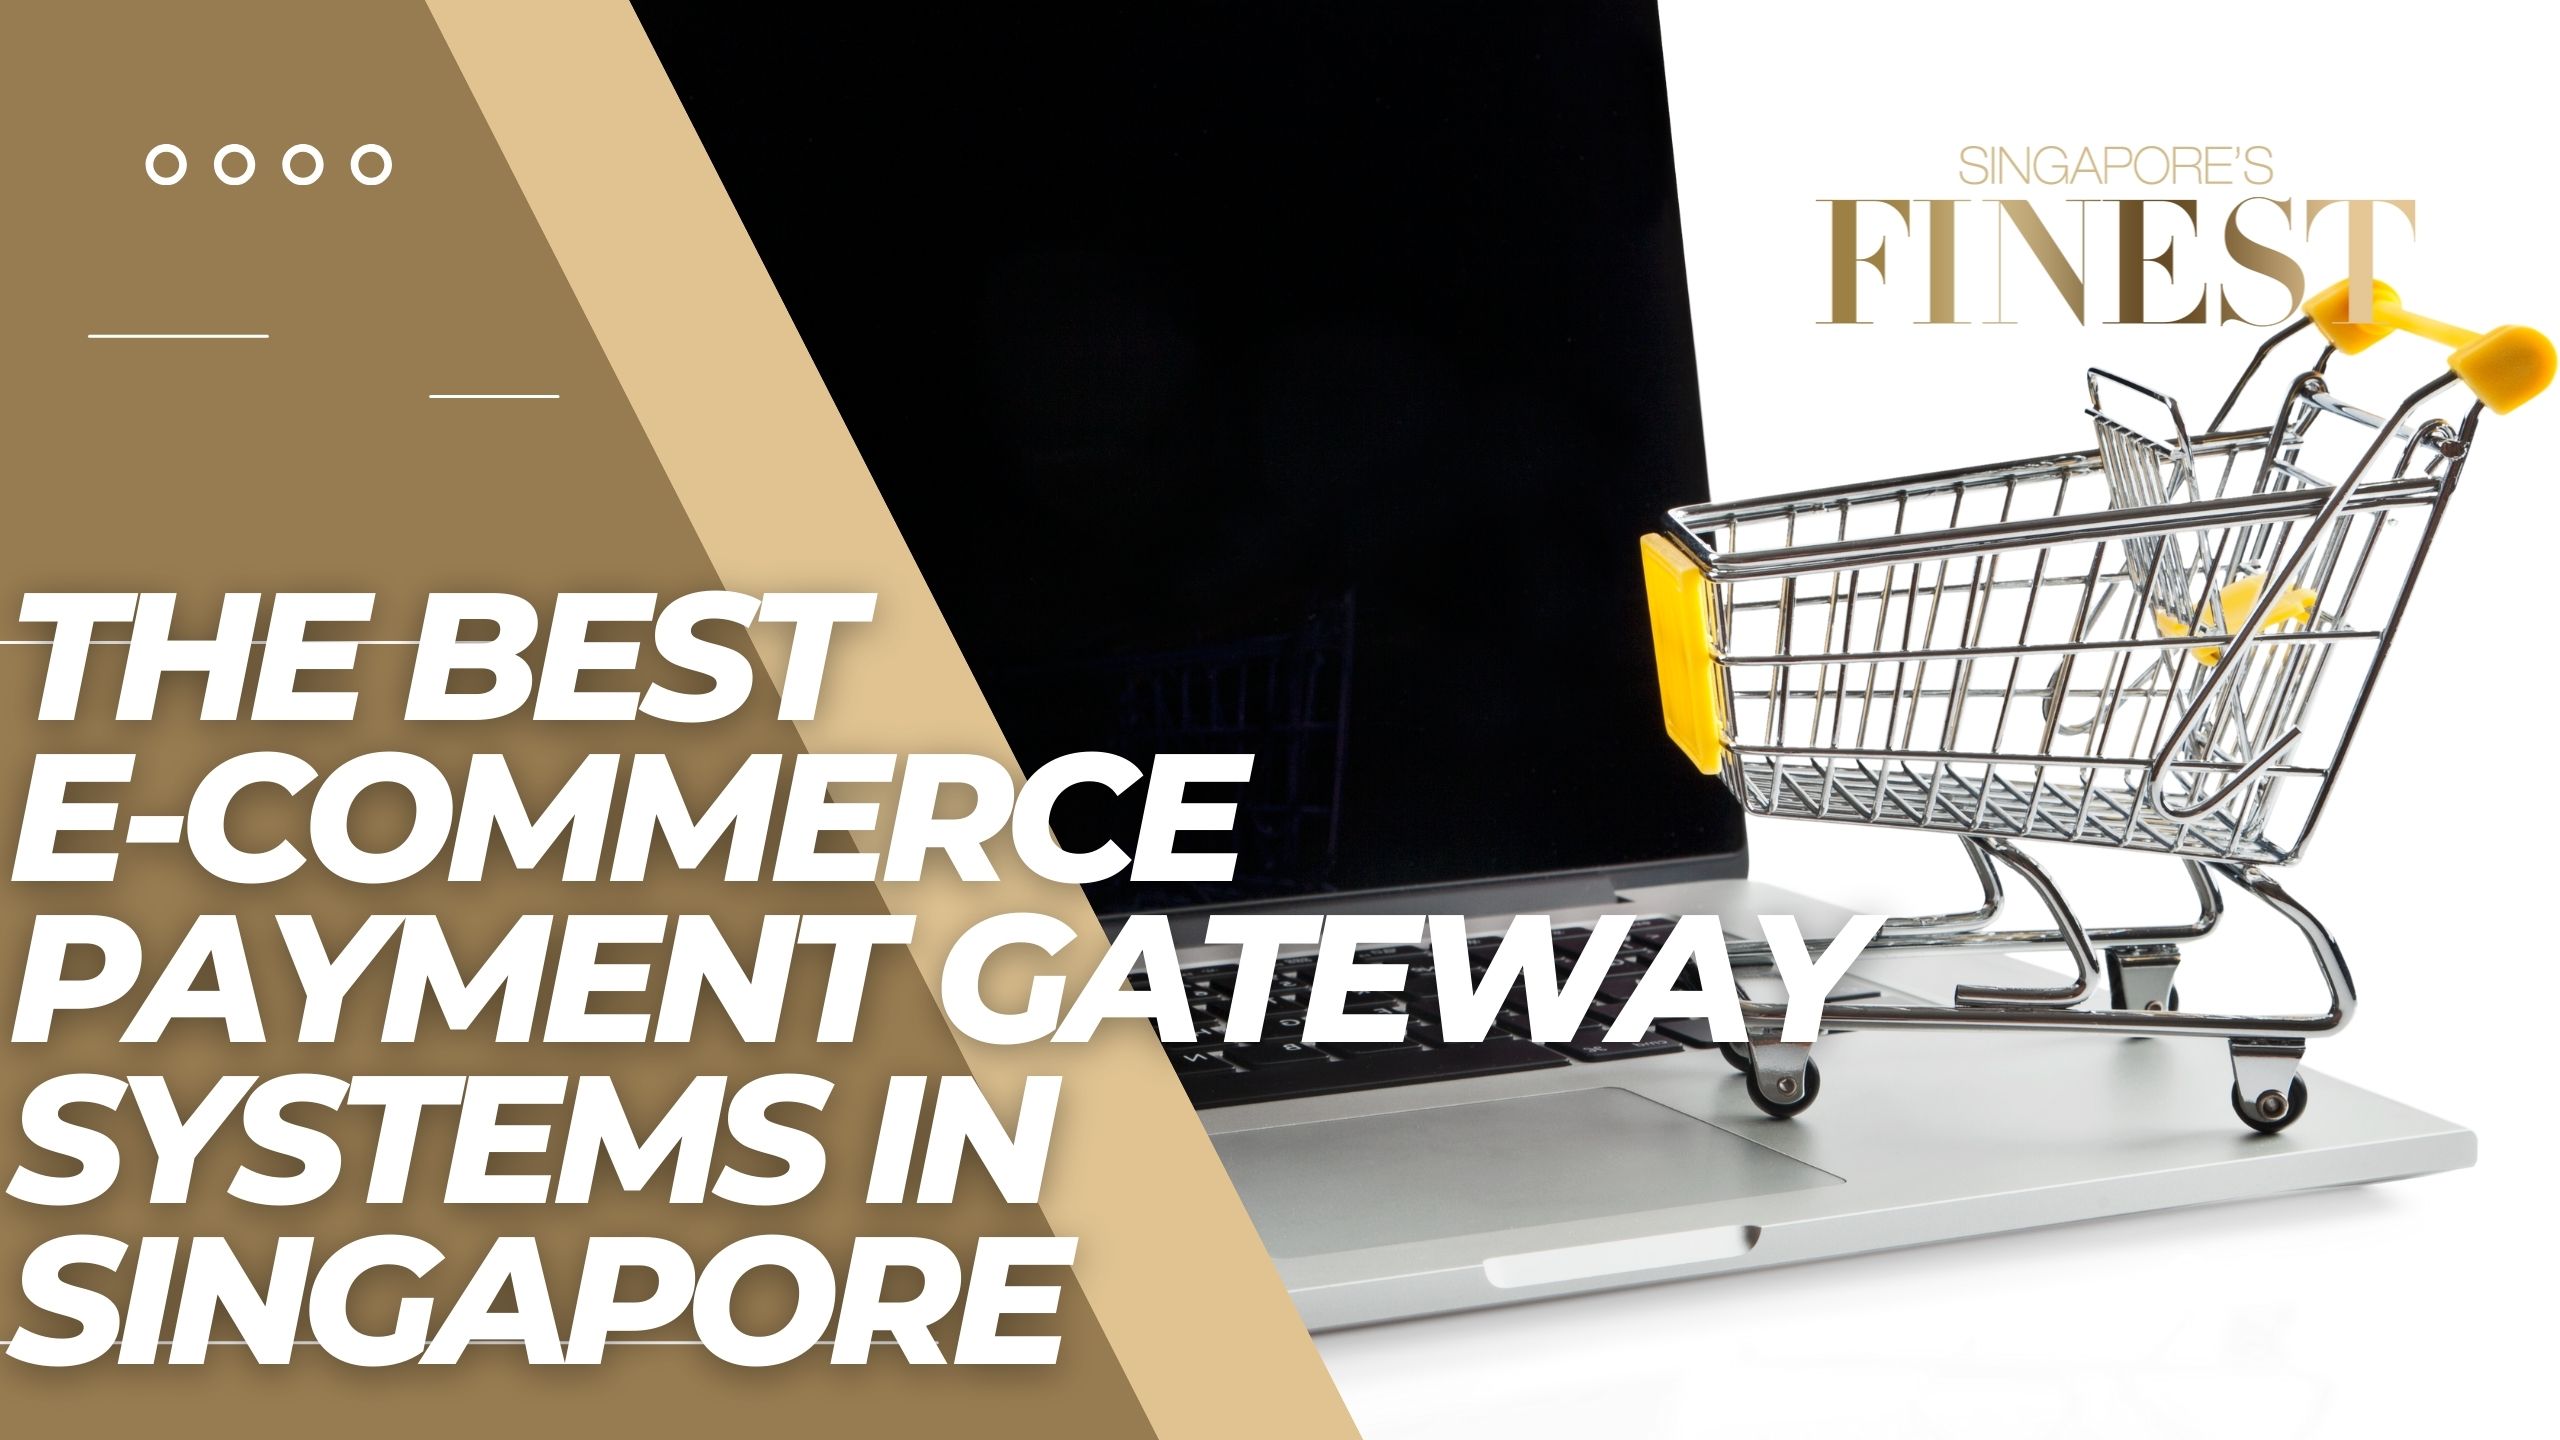 The Finest E-Commerce Payment Gateway Systems in Singapore